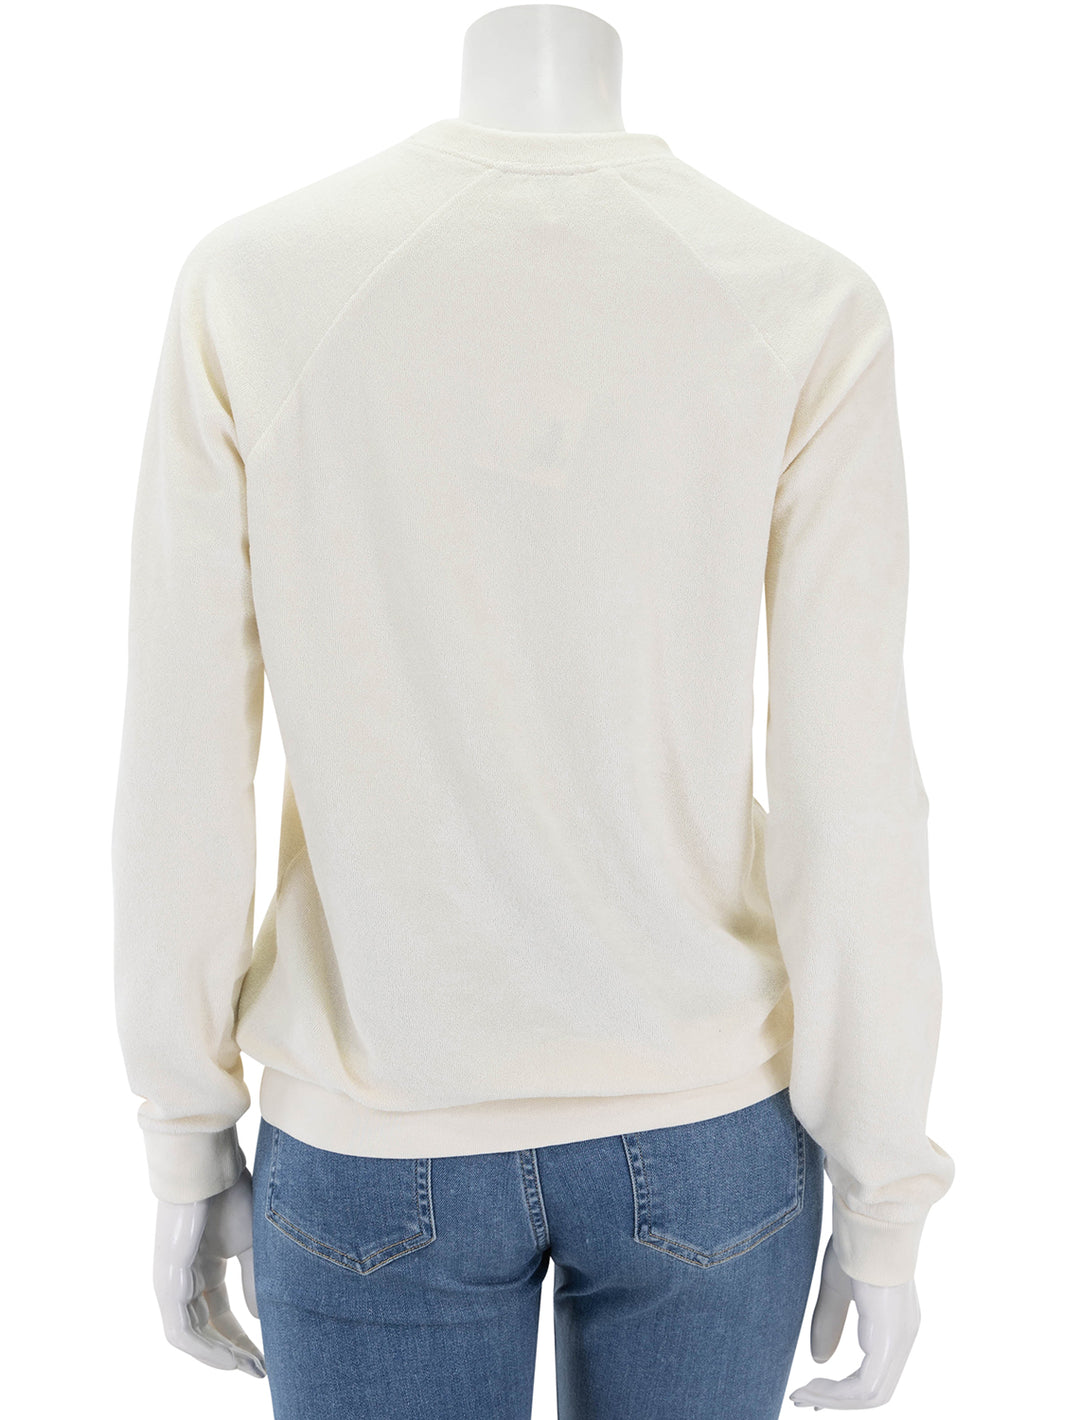 Back view of KULE's the terry franny in cream.